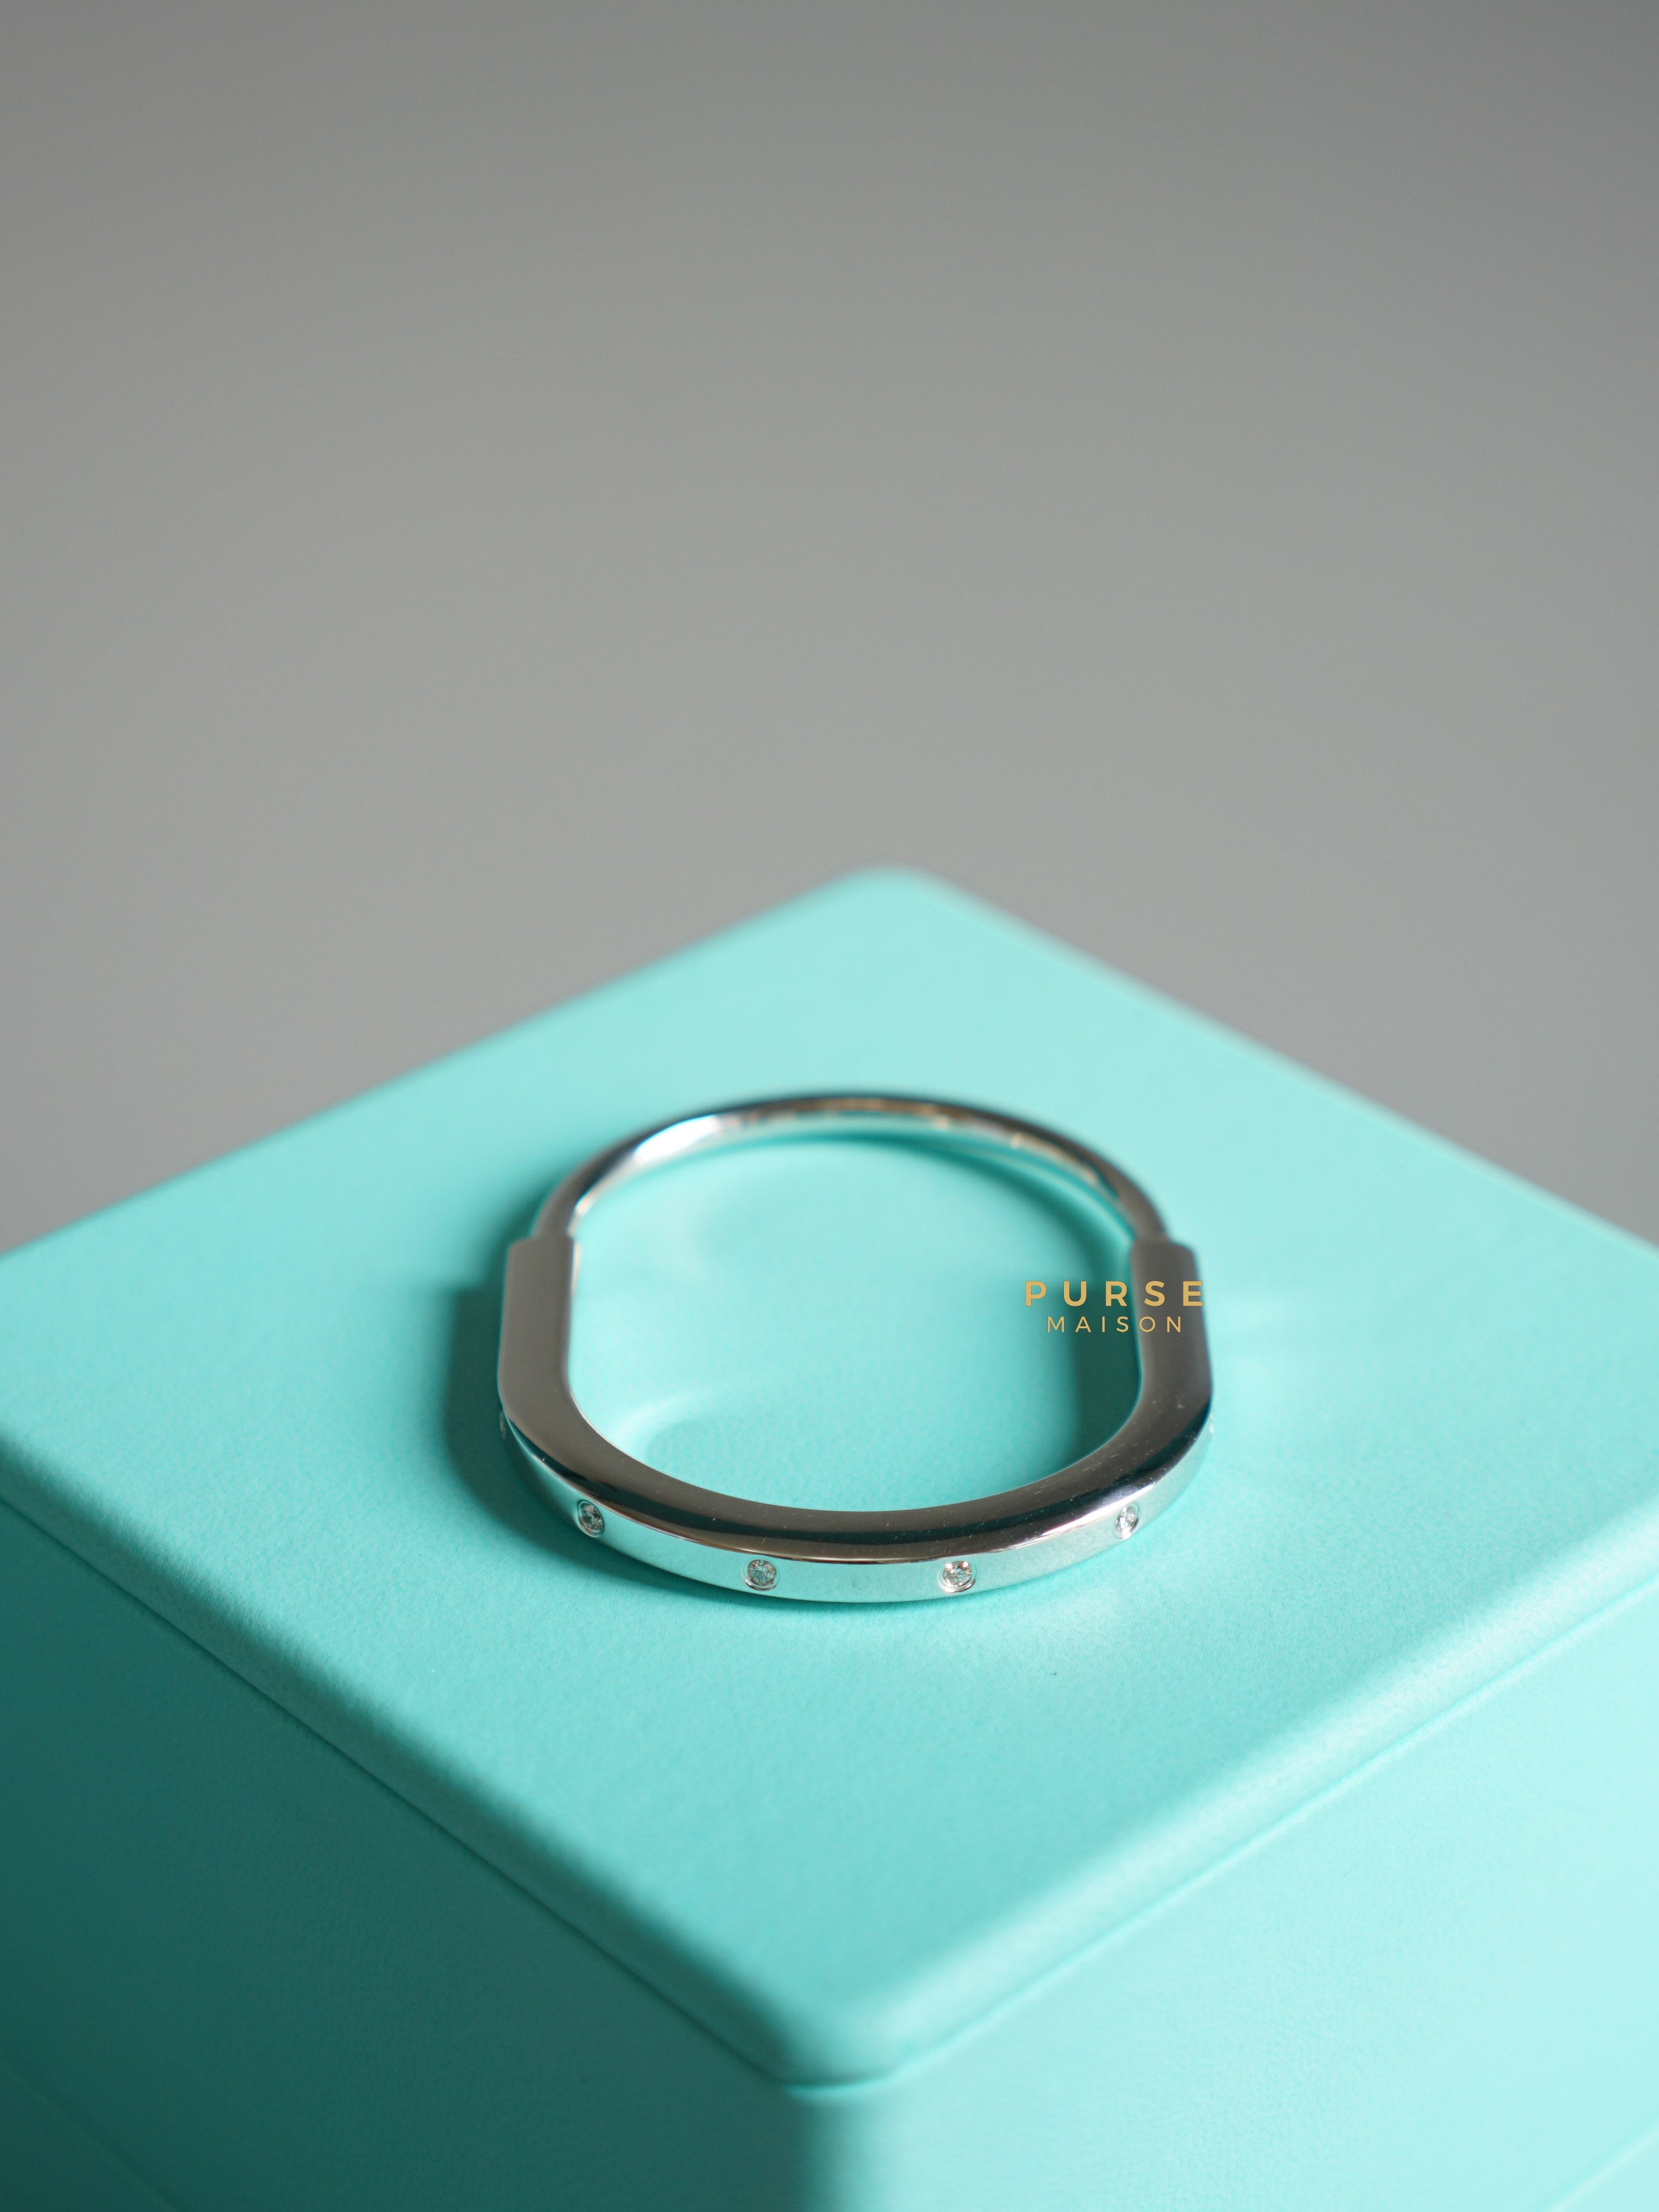 Tiffany Lock Bangle in White Gold with Diamond Accents | Purse Maison Luxury Bags Shop